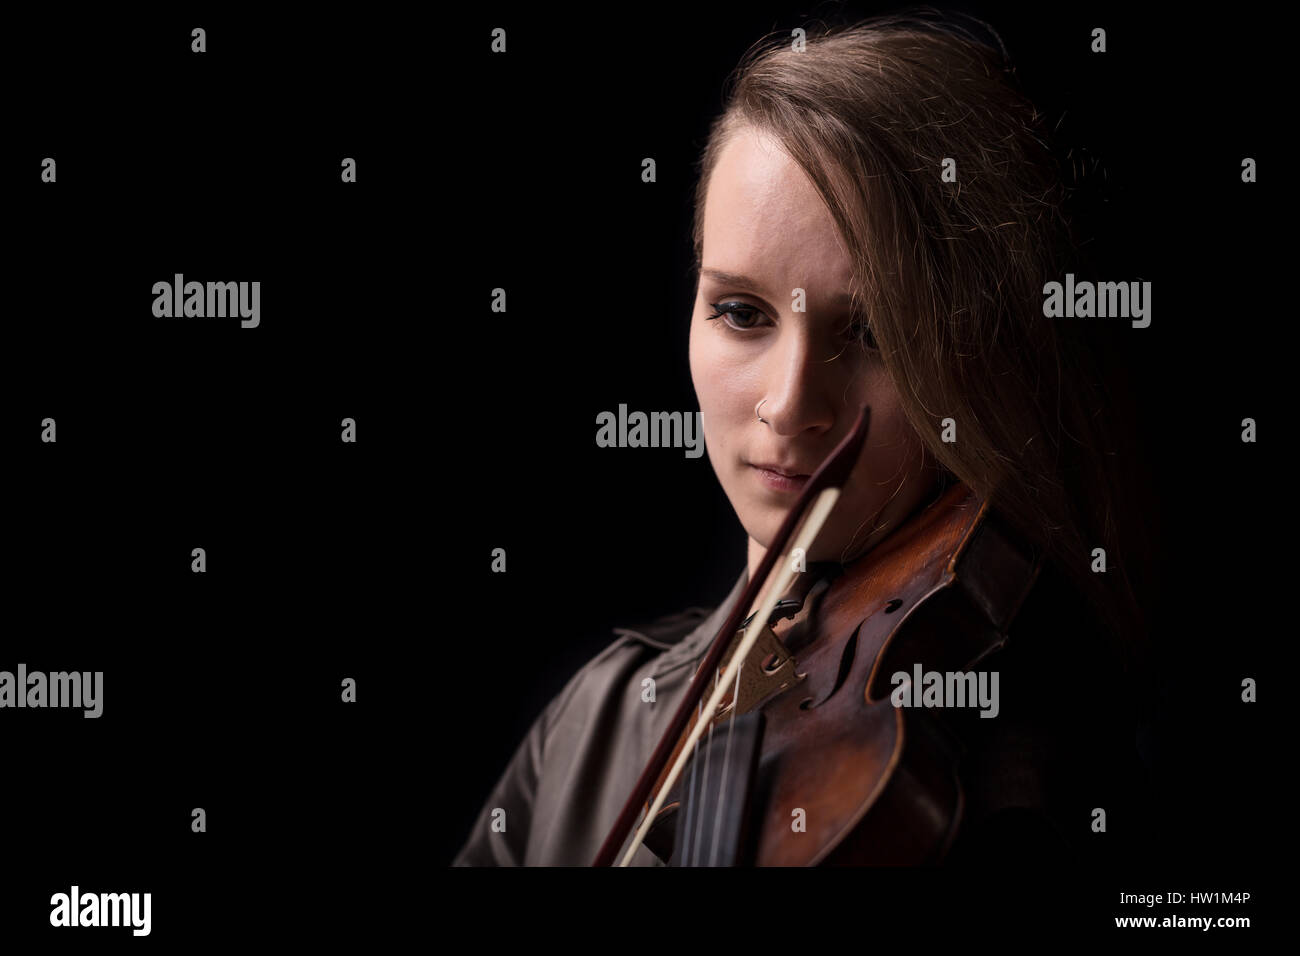 Young beautiful woman violinist player playing her instrument on her shoulder holding bow. portrait in a blurred dark room in background. Concept of c Stock Photo